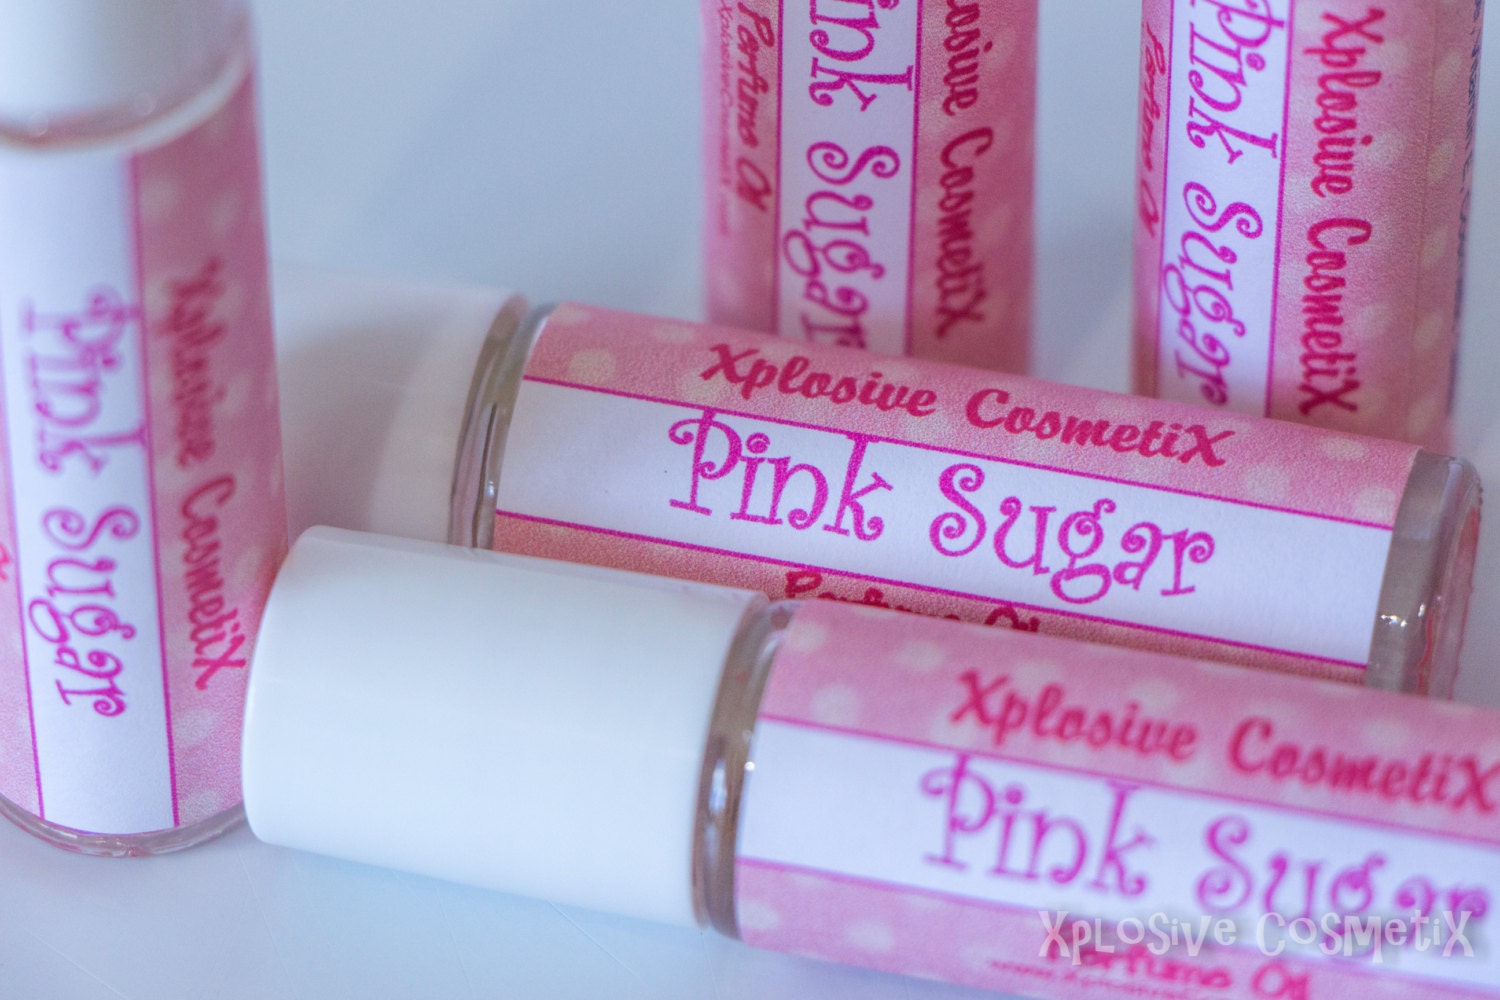 Pink Sugar Type For Woman Alternative Generic Version) Set of 3 10.35 ml  Roll-on